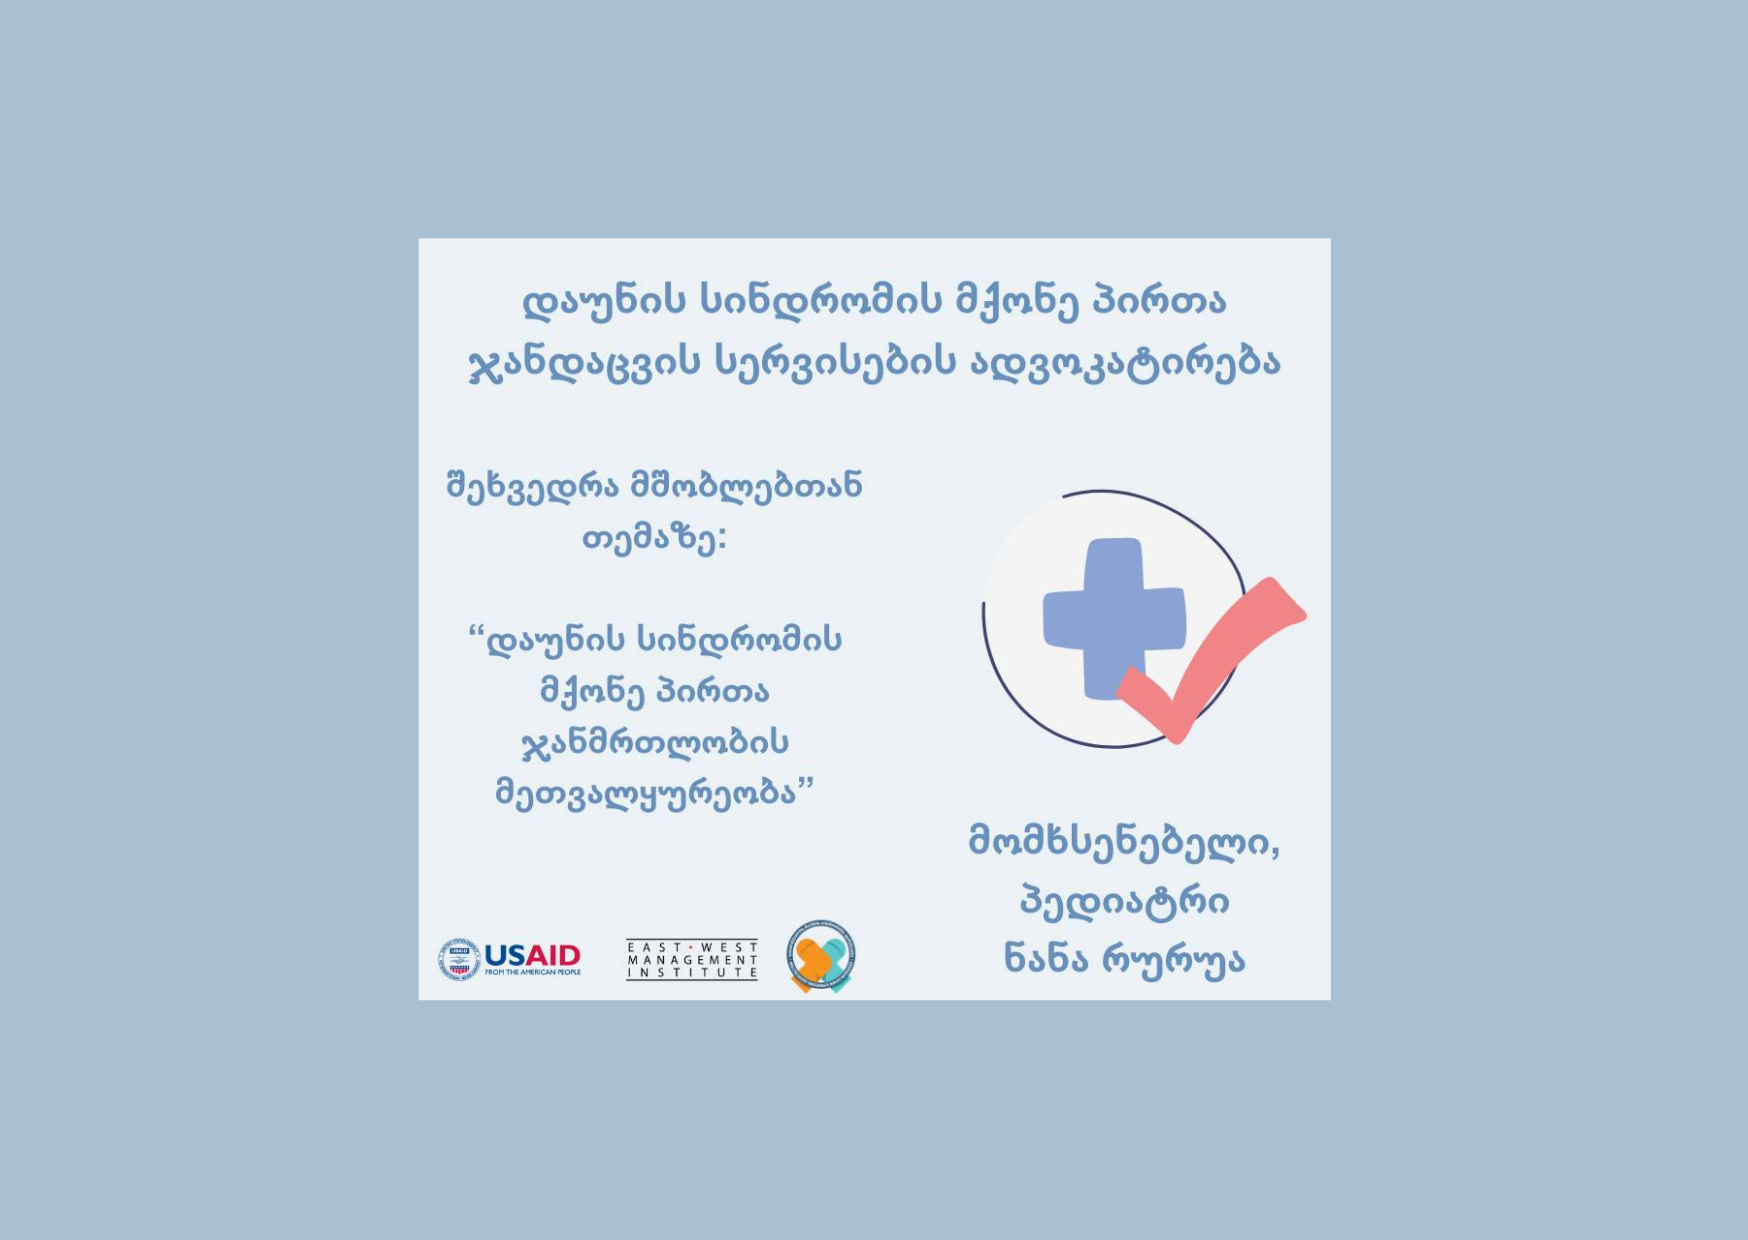 "Advocacy of Health Services for People with Down Syndrome"